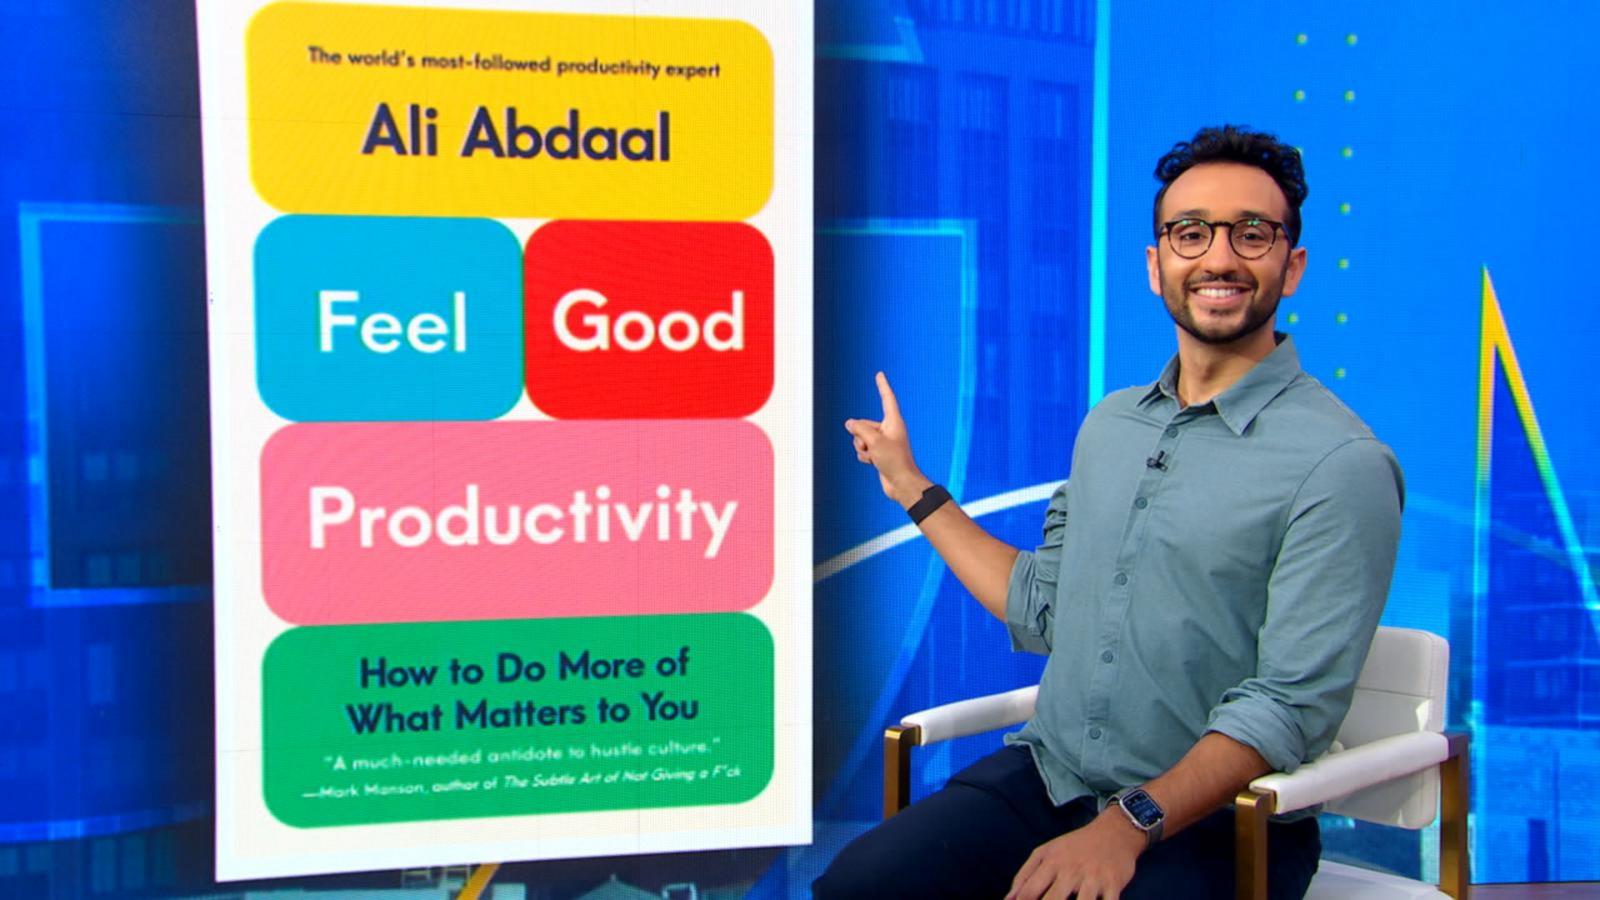 Feel Good Productivity Review  Ali Abdaal's New Book 